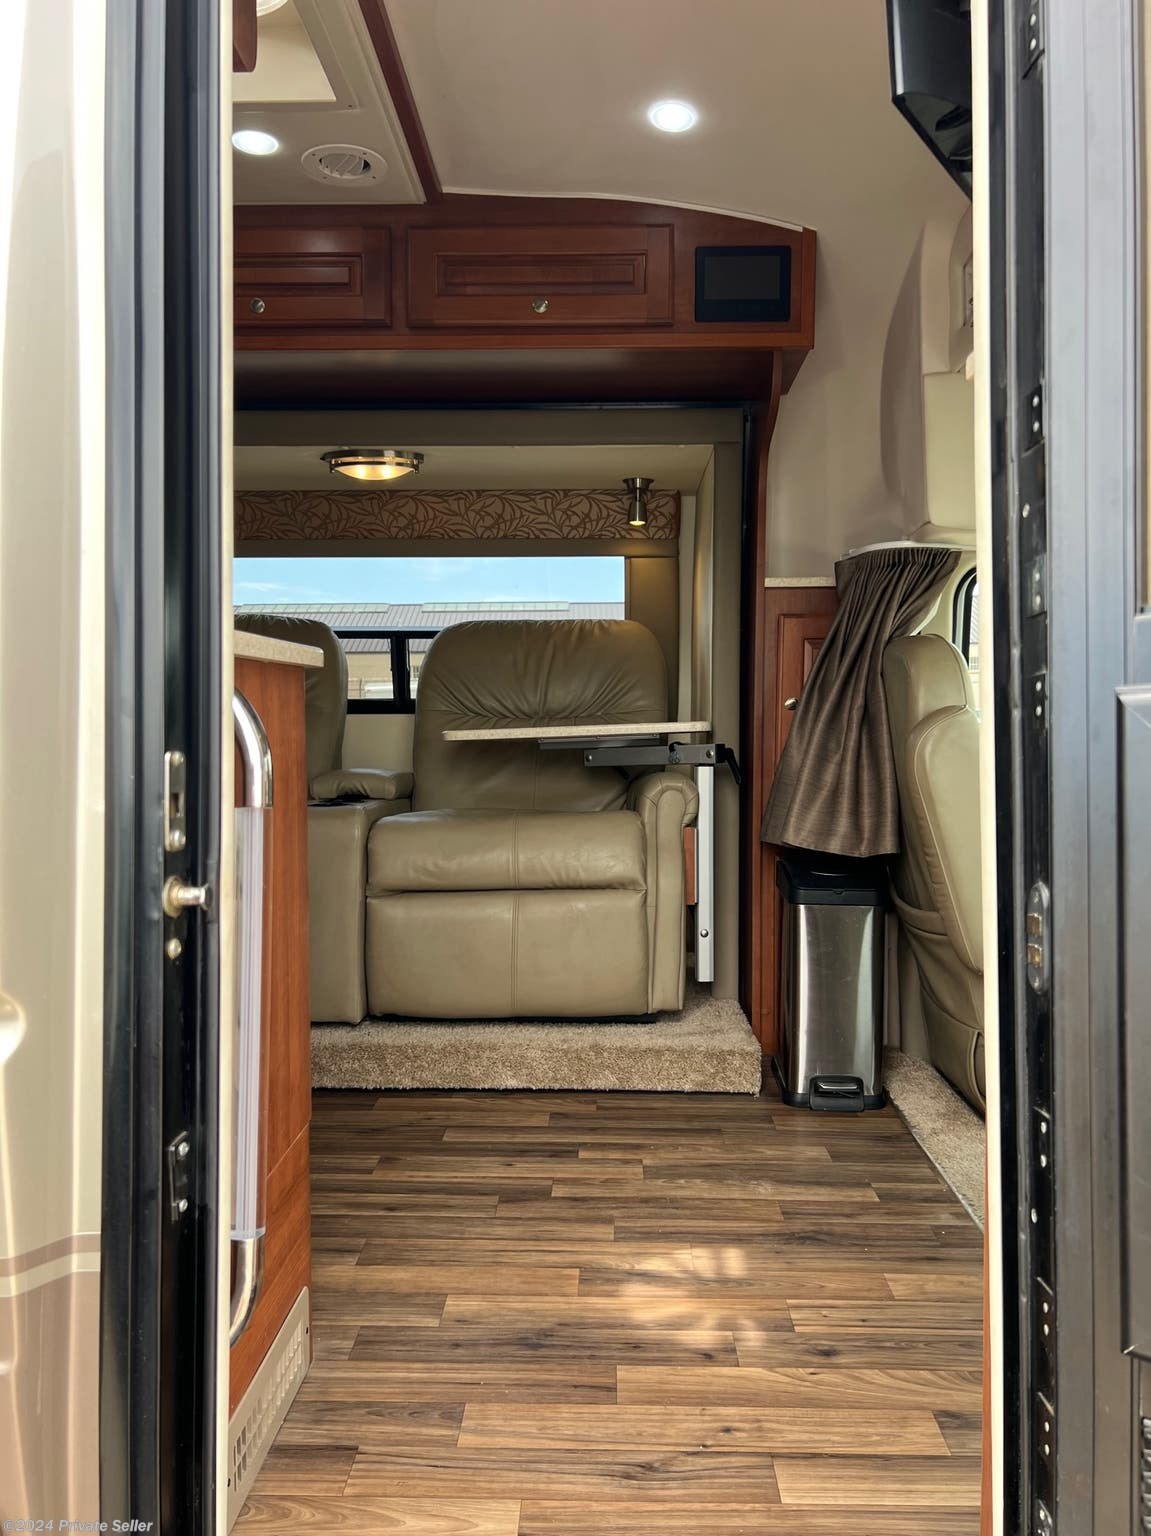 2018 Coach House Platinum 272XL: 2 Slides, Front Recliners RV for Sale in  Albuquerque, NM 87111 |  Classifieds